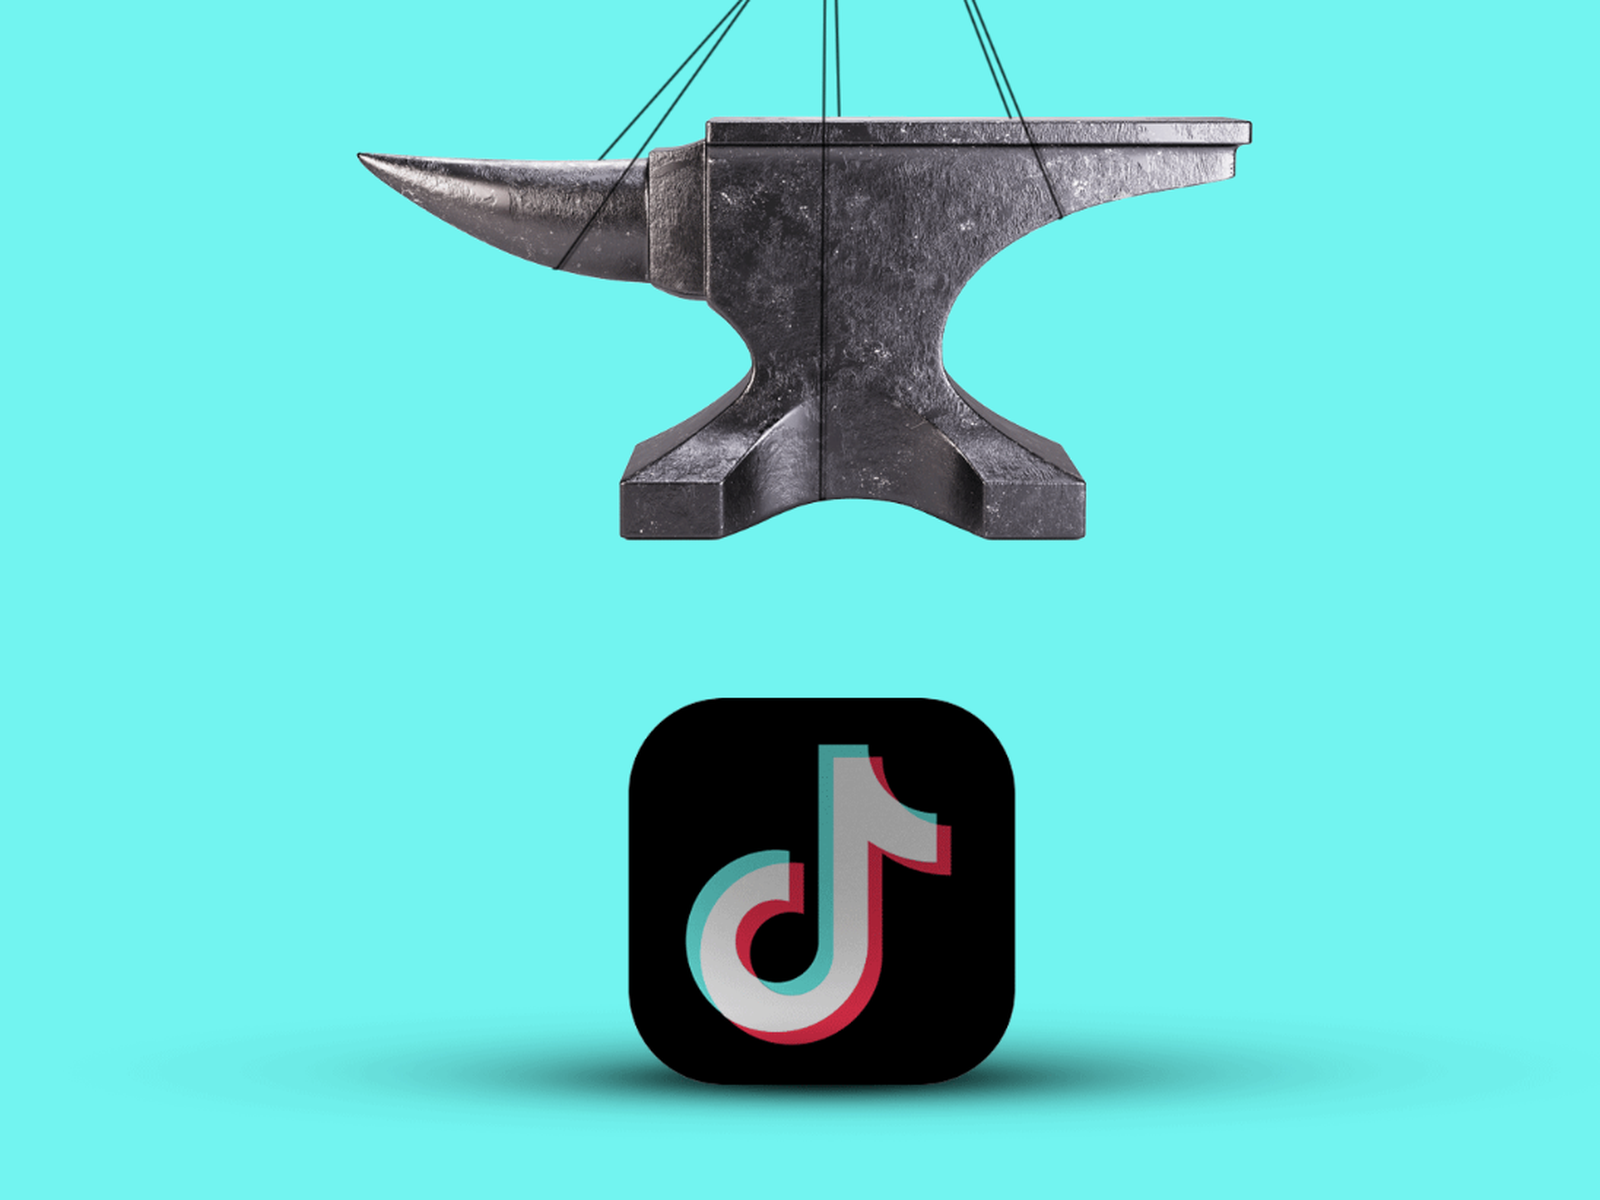 TikTok: Rise of Video-Sharing App Tied to China and Loathed by Trump